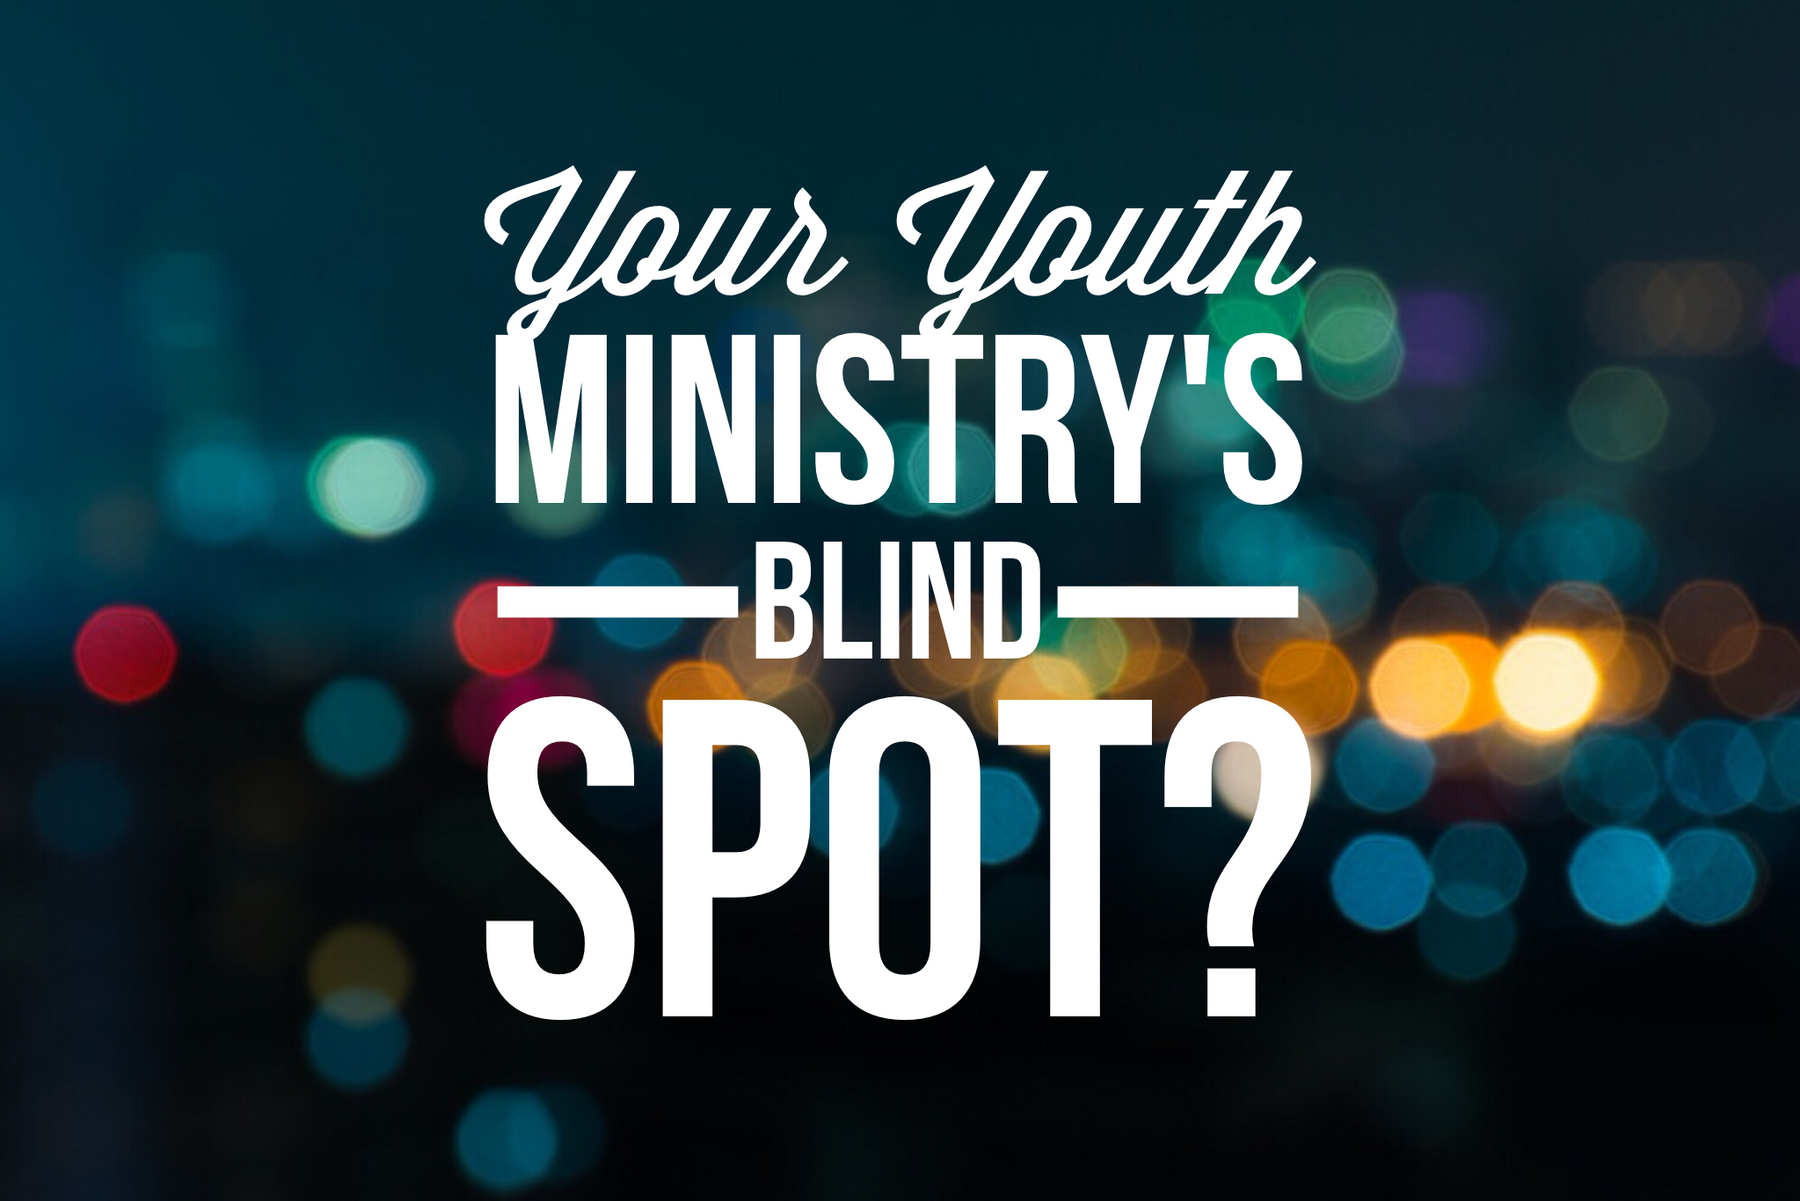 Does Your Youth Ministry Have This Huge Blind Spot?